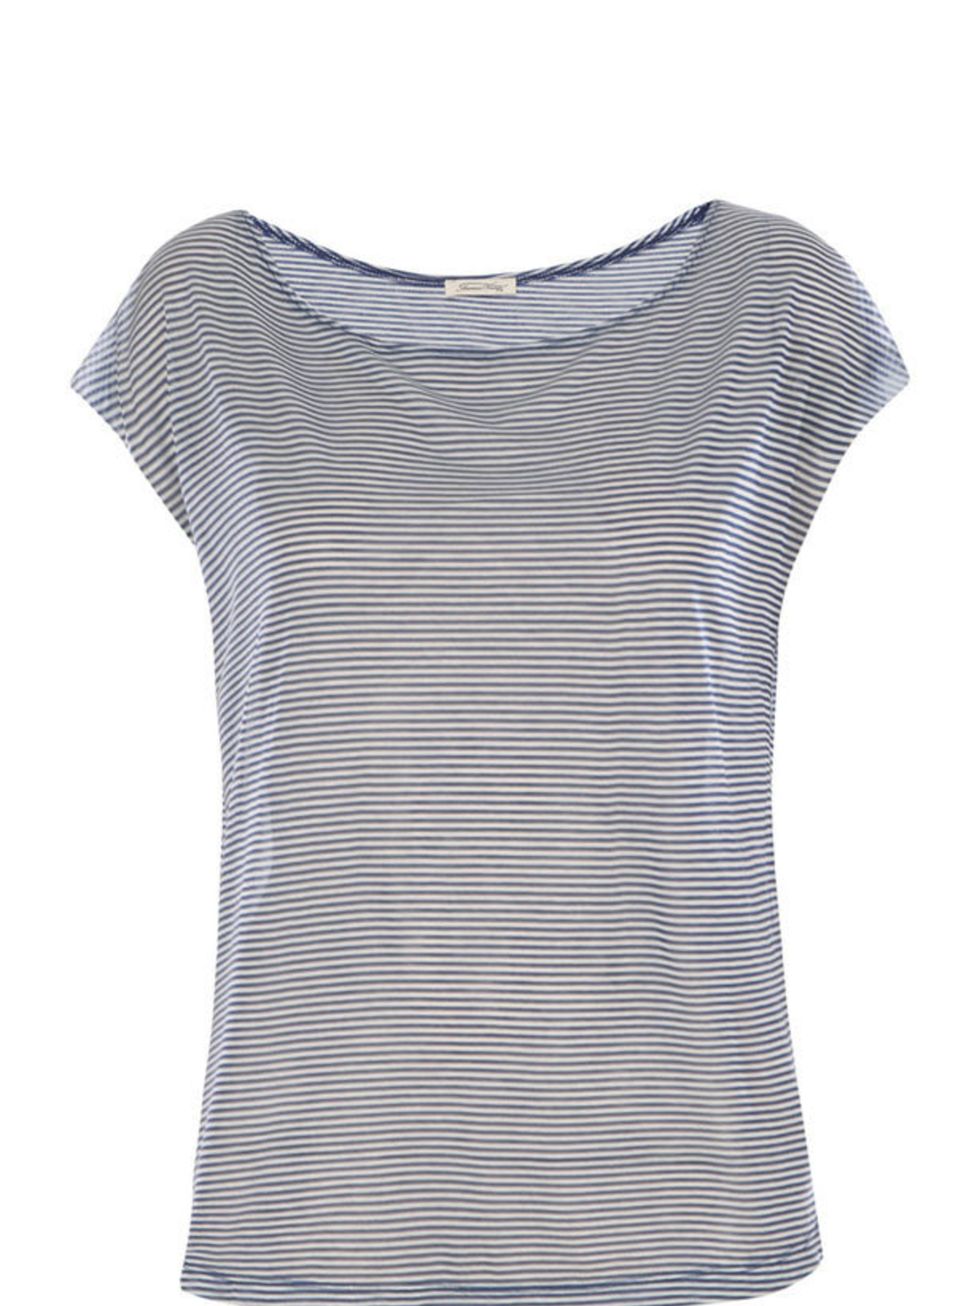 <p>American Vintage striped t-shirt, £42, for stockists call 0207 486 0486</p>